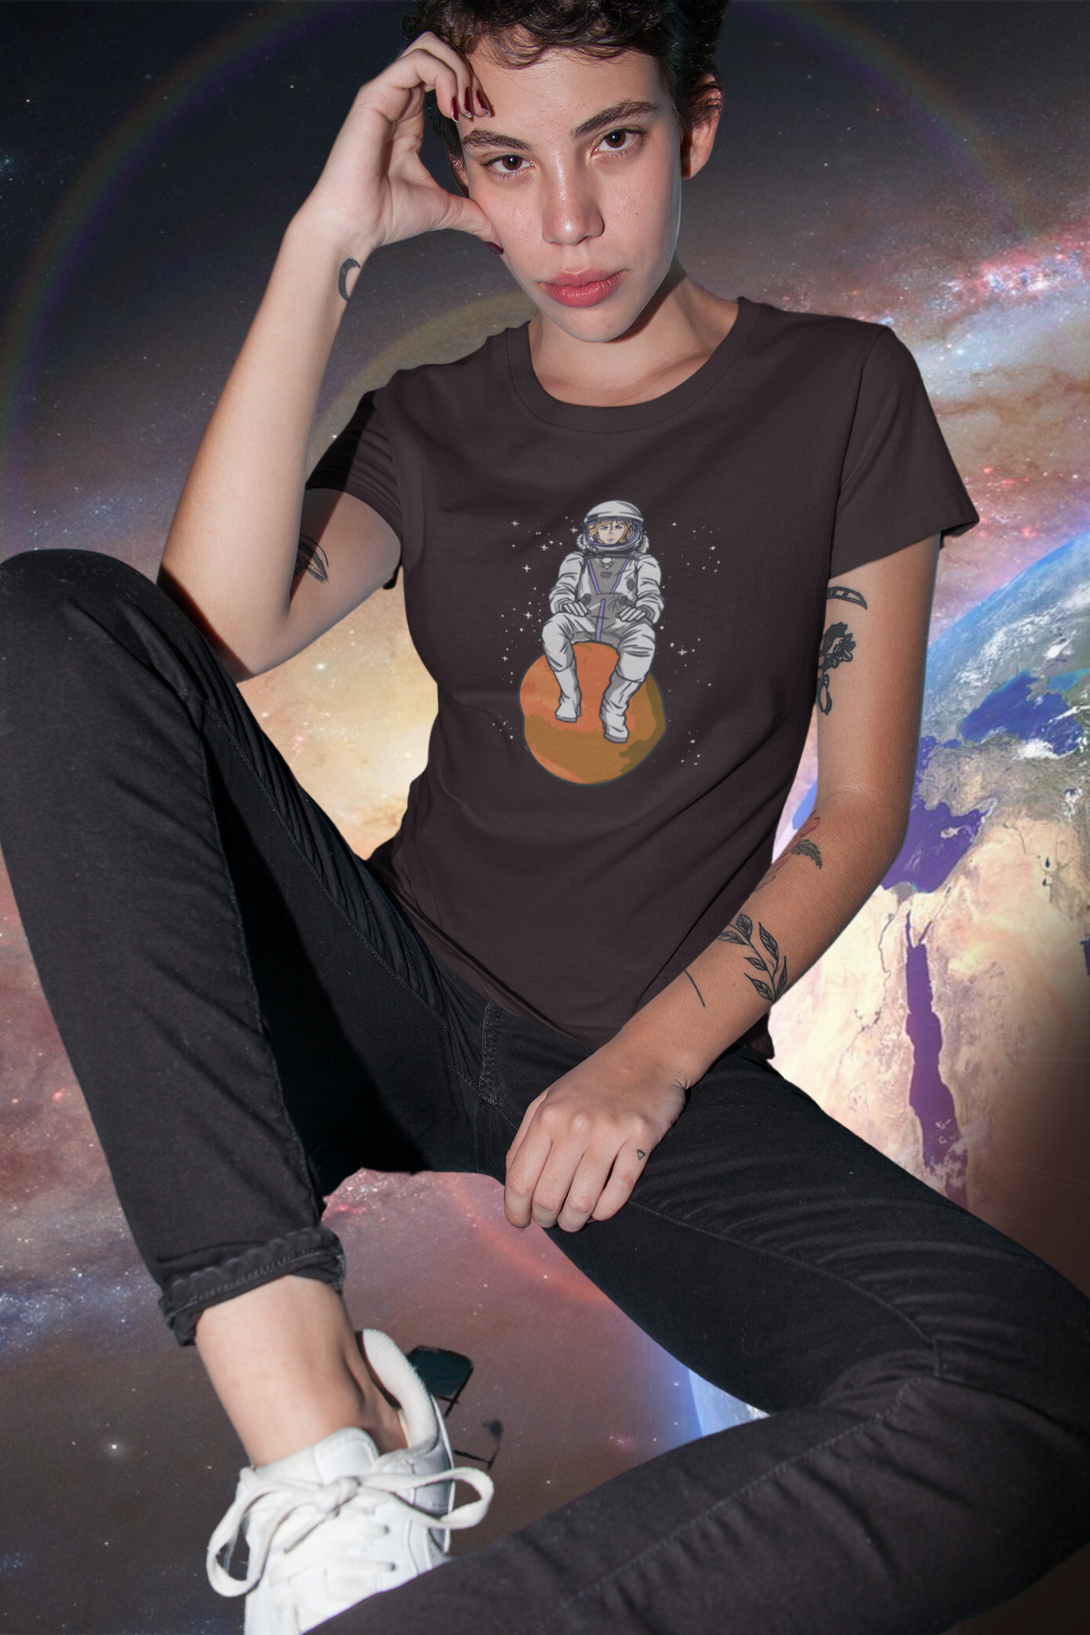 Space Explorer Printed T-Shirt For Women - WowWaves - 2